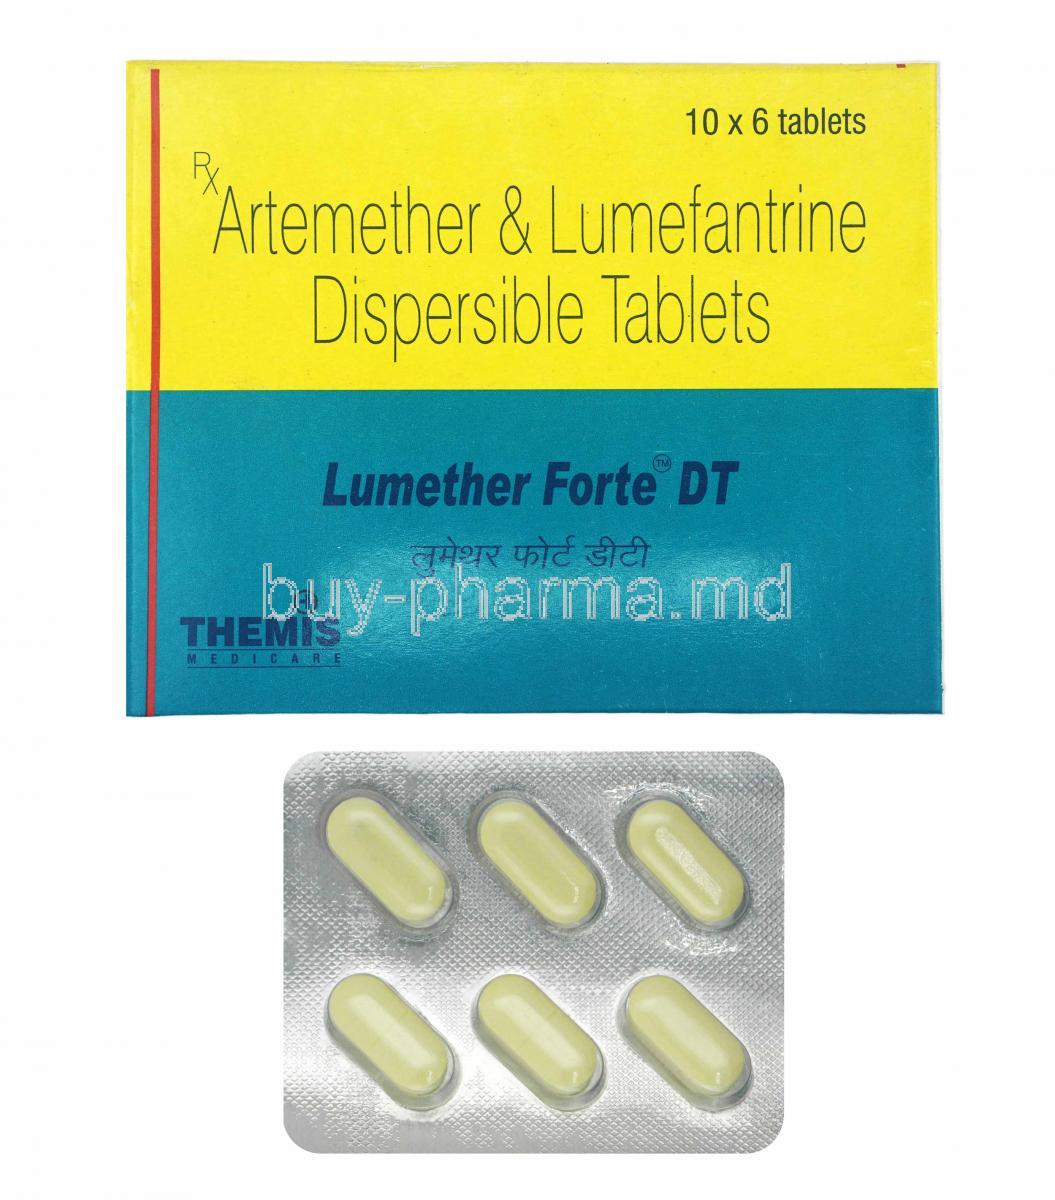 Lumether Forte, Artemether and Lumefantrine box and tablets